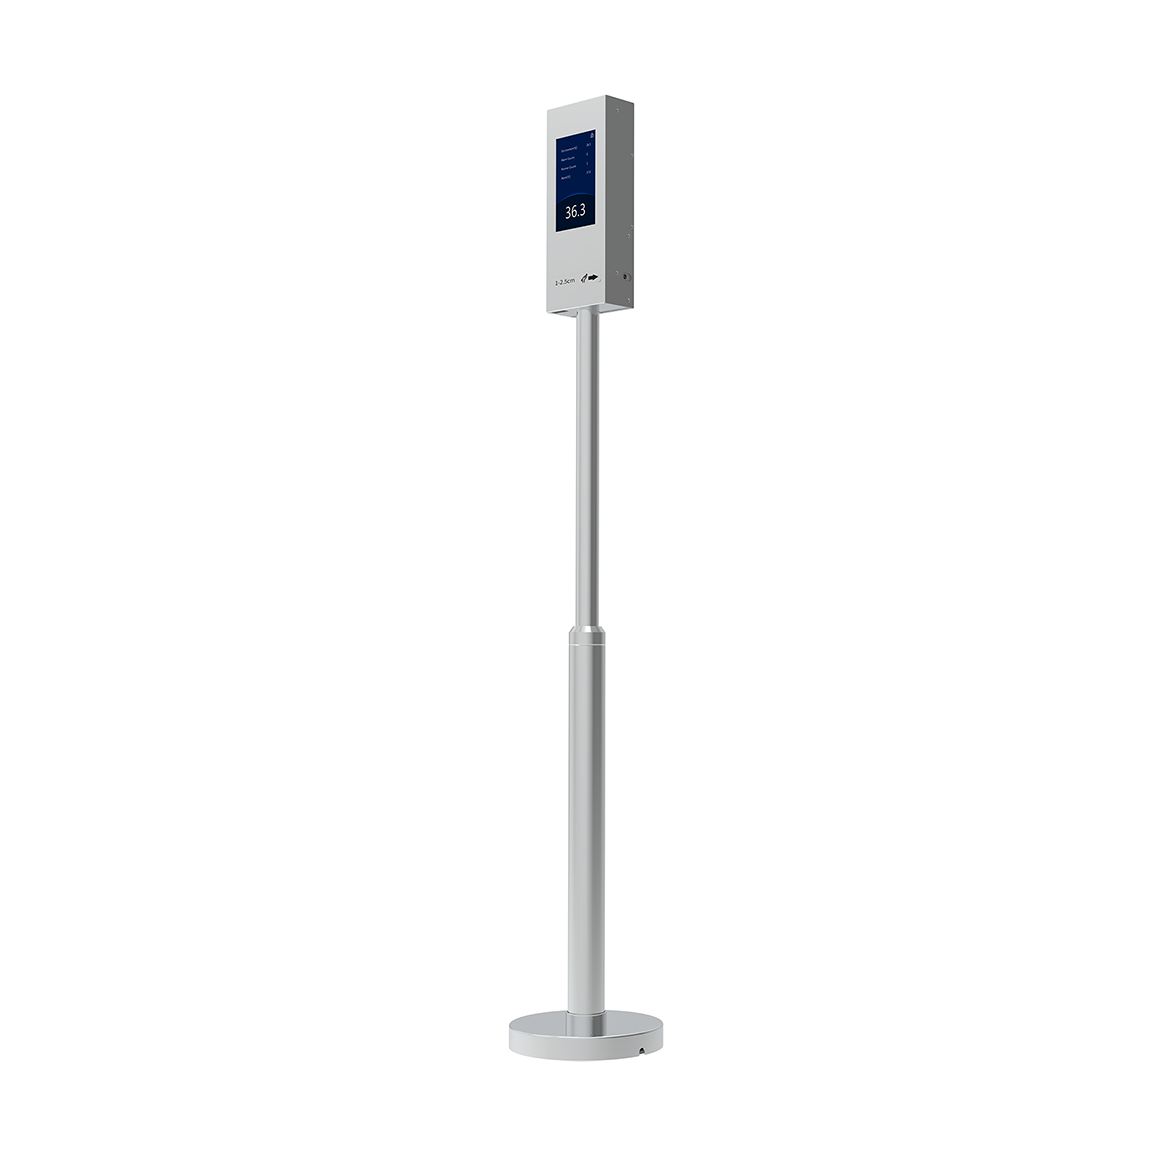 OTC513 Automatic Temperature Detection Pole Mounted System